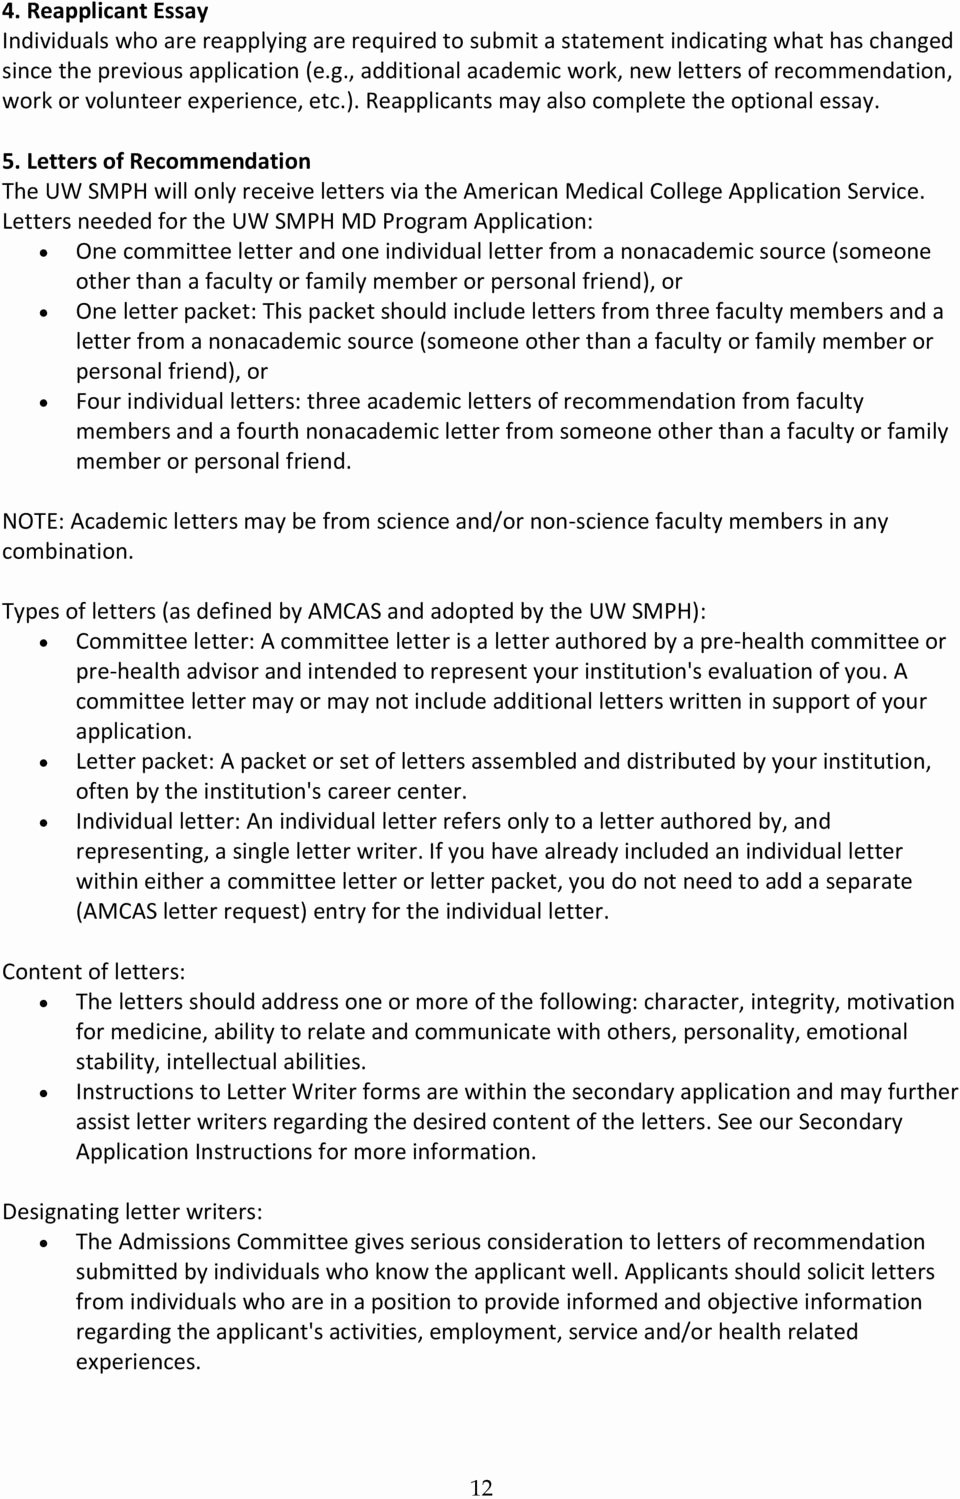 Amcas Letter Of Recommendation Guidelines New University Of Wisconsin School Of Medicine and Public